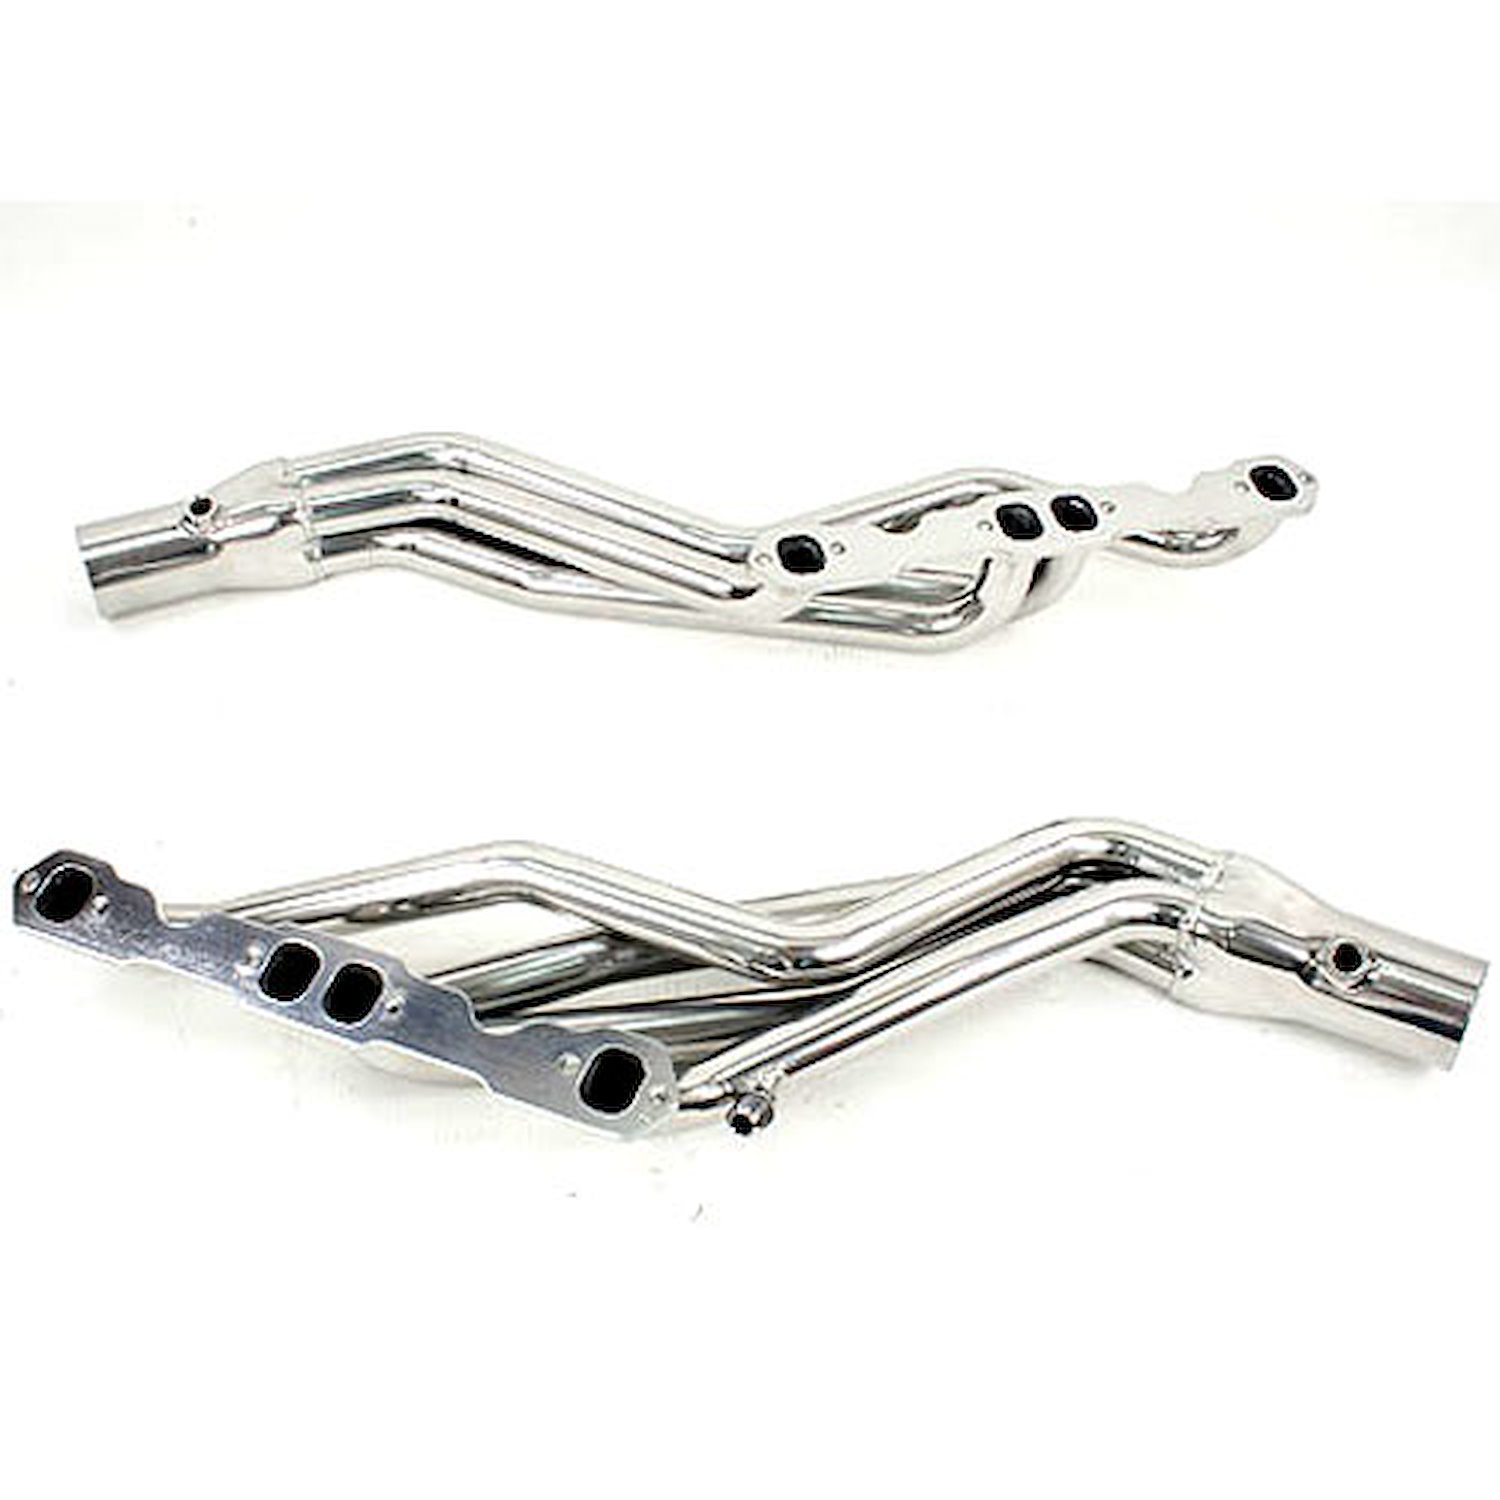 Armor Coat Truck Headers 1996-1999 Chevy/GMC 1500, 2500, Tahoe, Yukon, Suburban 2WD/4WD 5.0L/5.7L (With EGR)